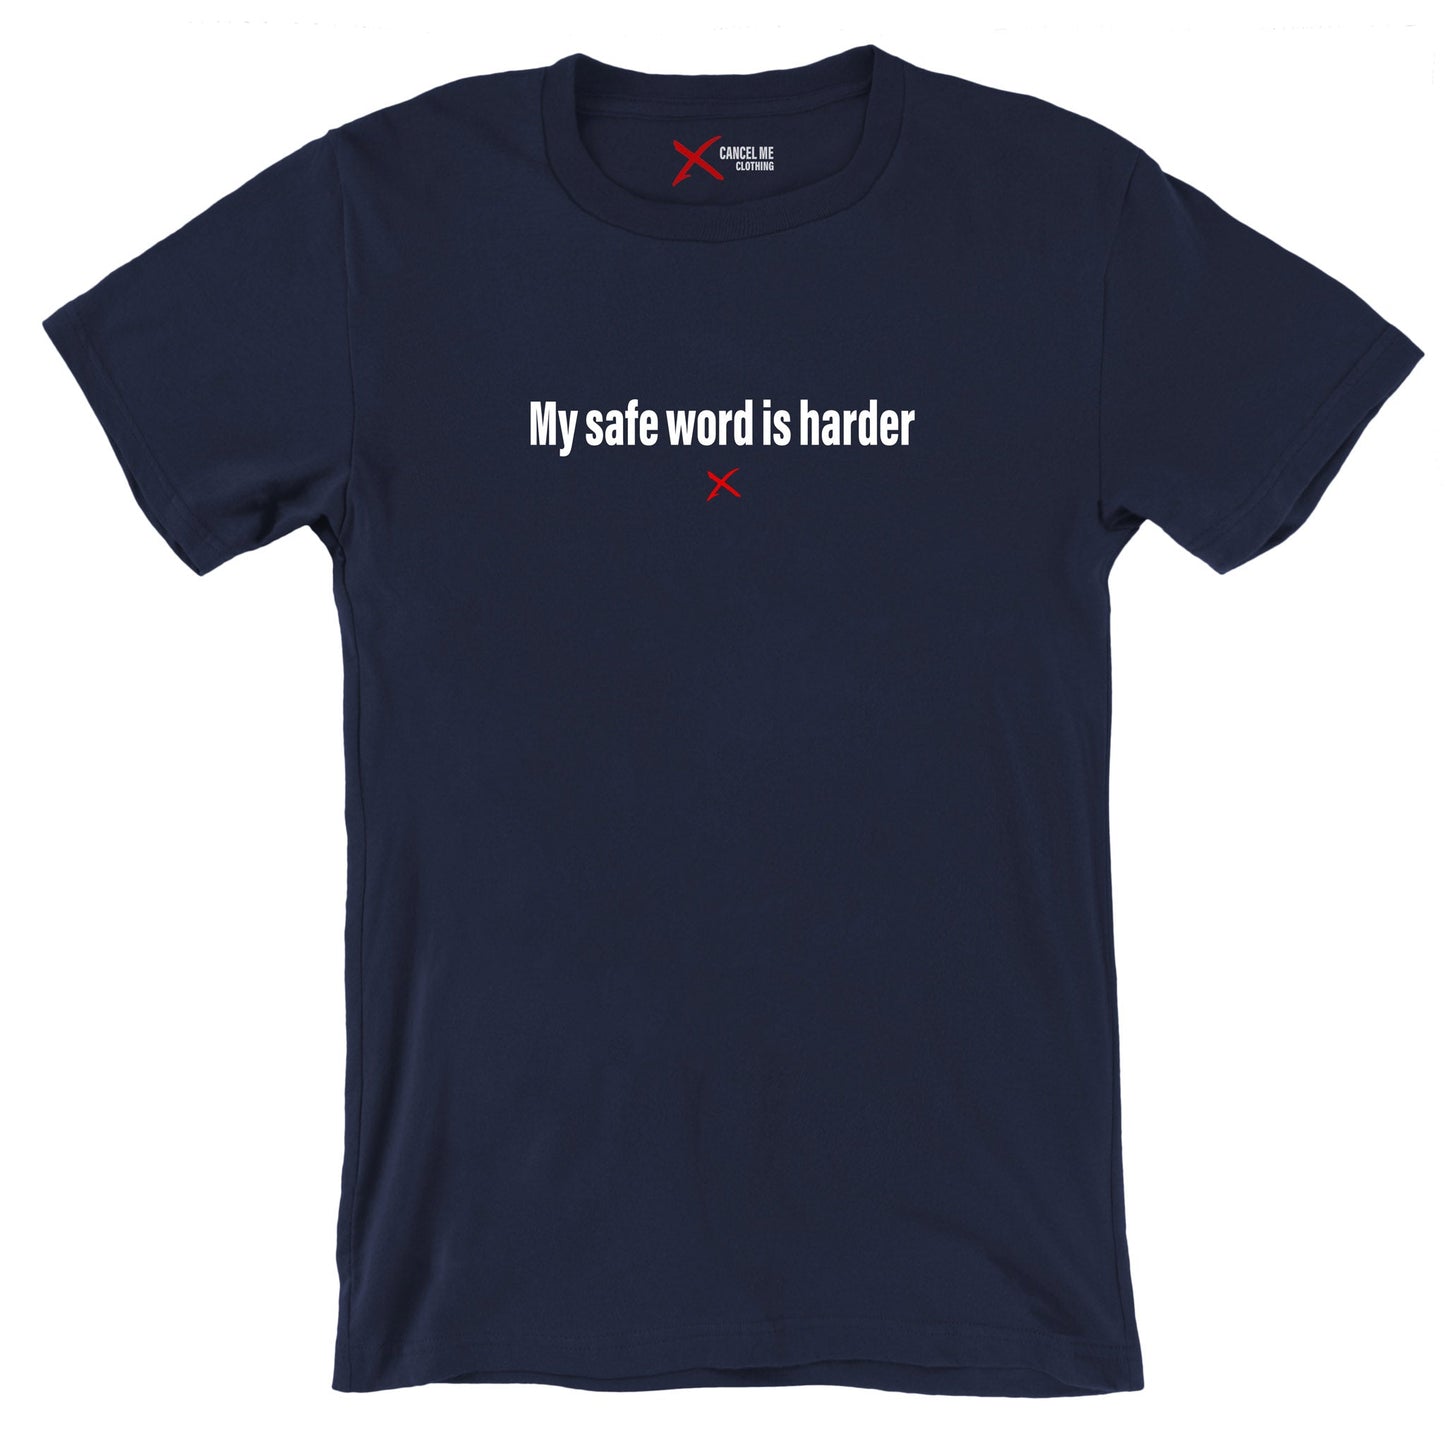 My safe word is harder - Shirt